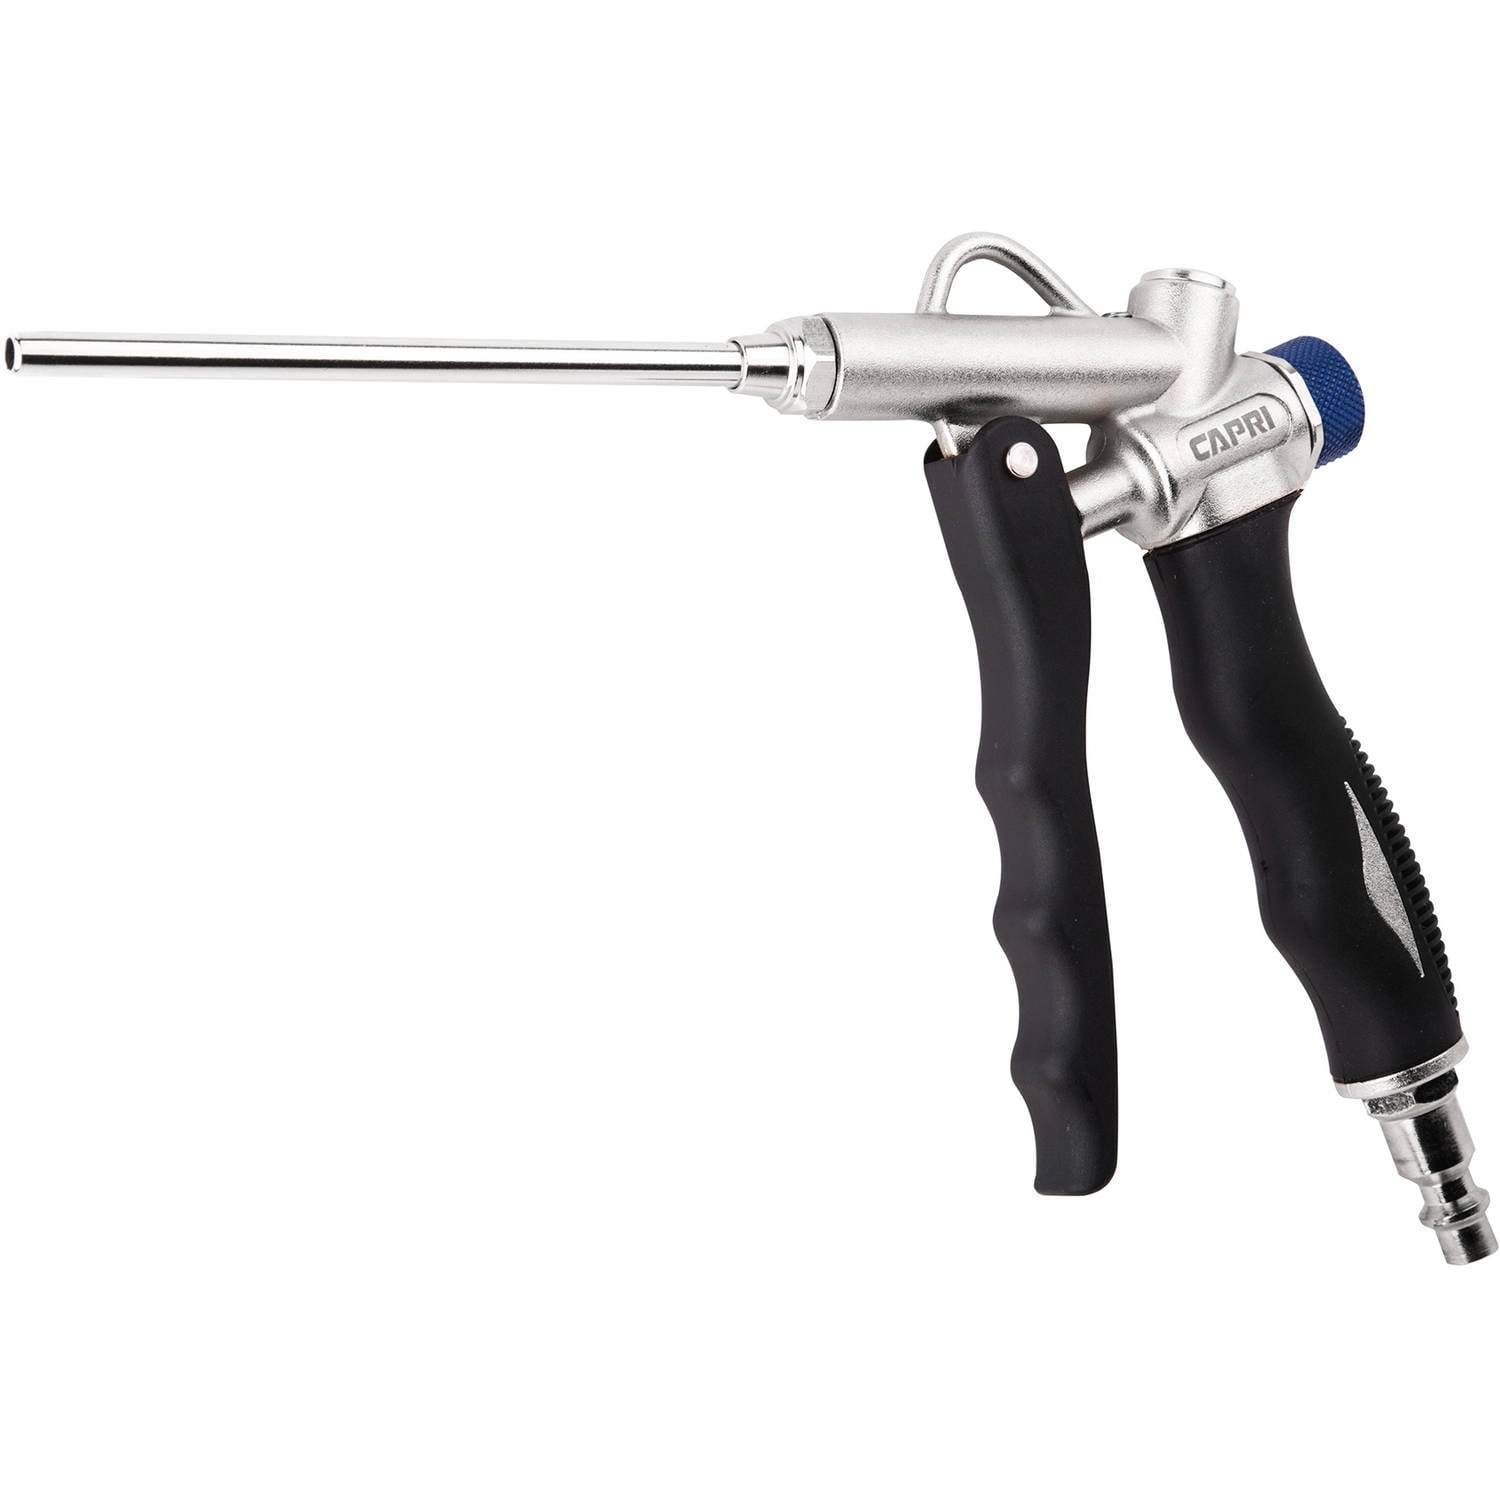 Astro Pneumatic 1716 Deluxe Air Blow Gun w/ 20" Angled Nozzle & 1/2" Remov Tip 